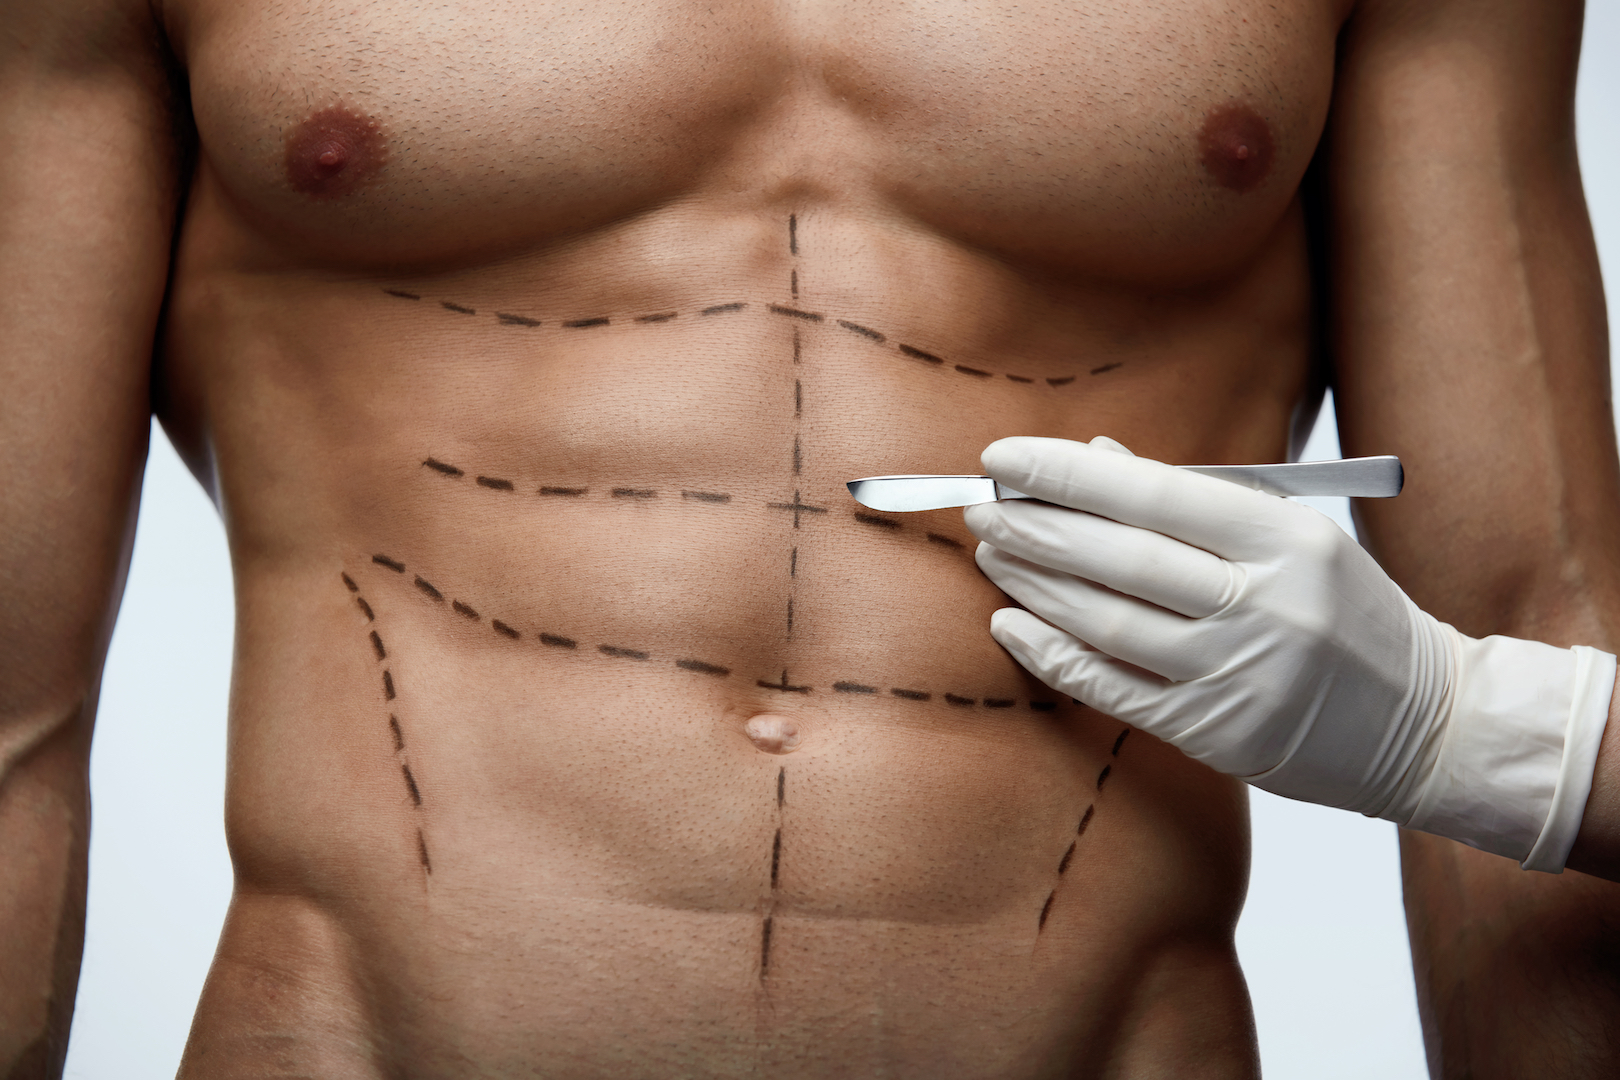 Male plastic surgery on the rise